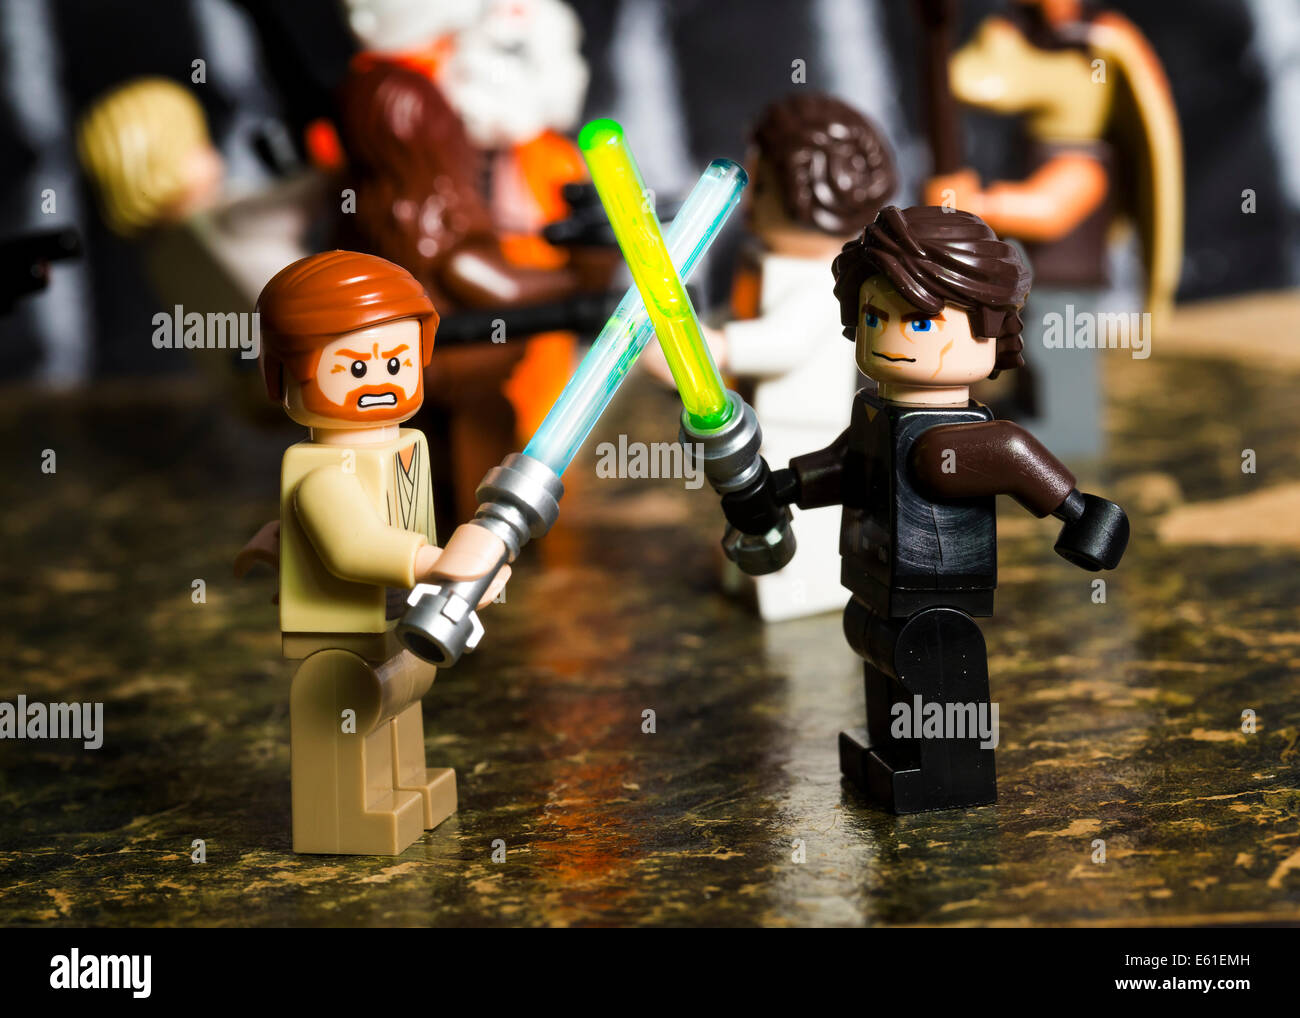 Lego Star Wars High Resolution Stock Photography and Images - Alamy